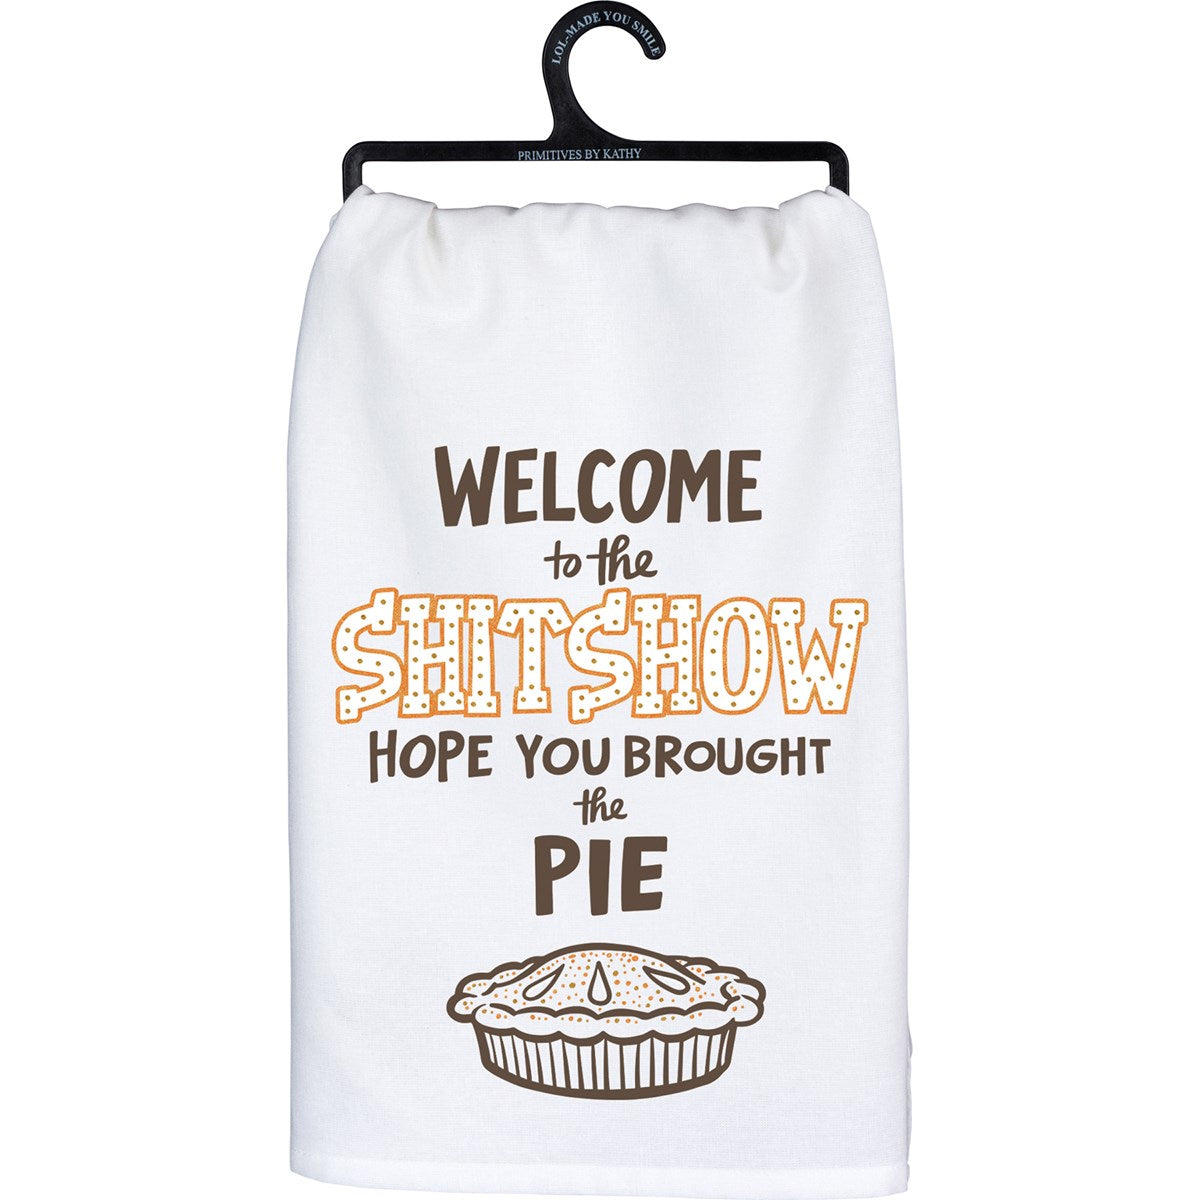 Hope Your Brought Pie Kitchen Towel